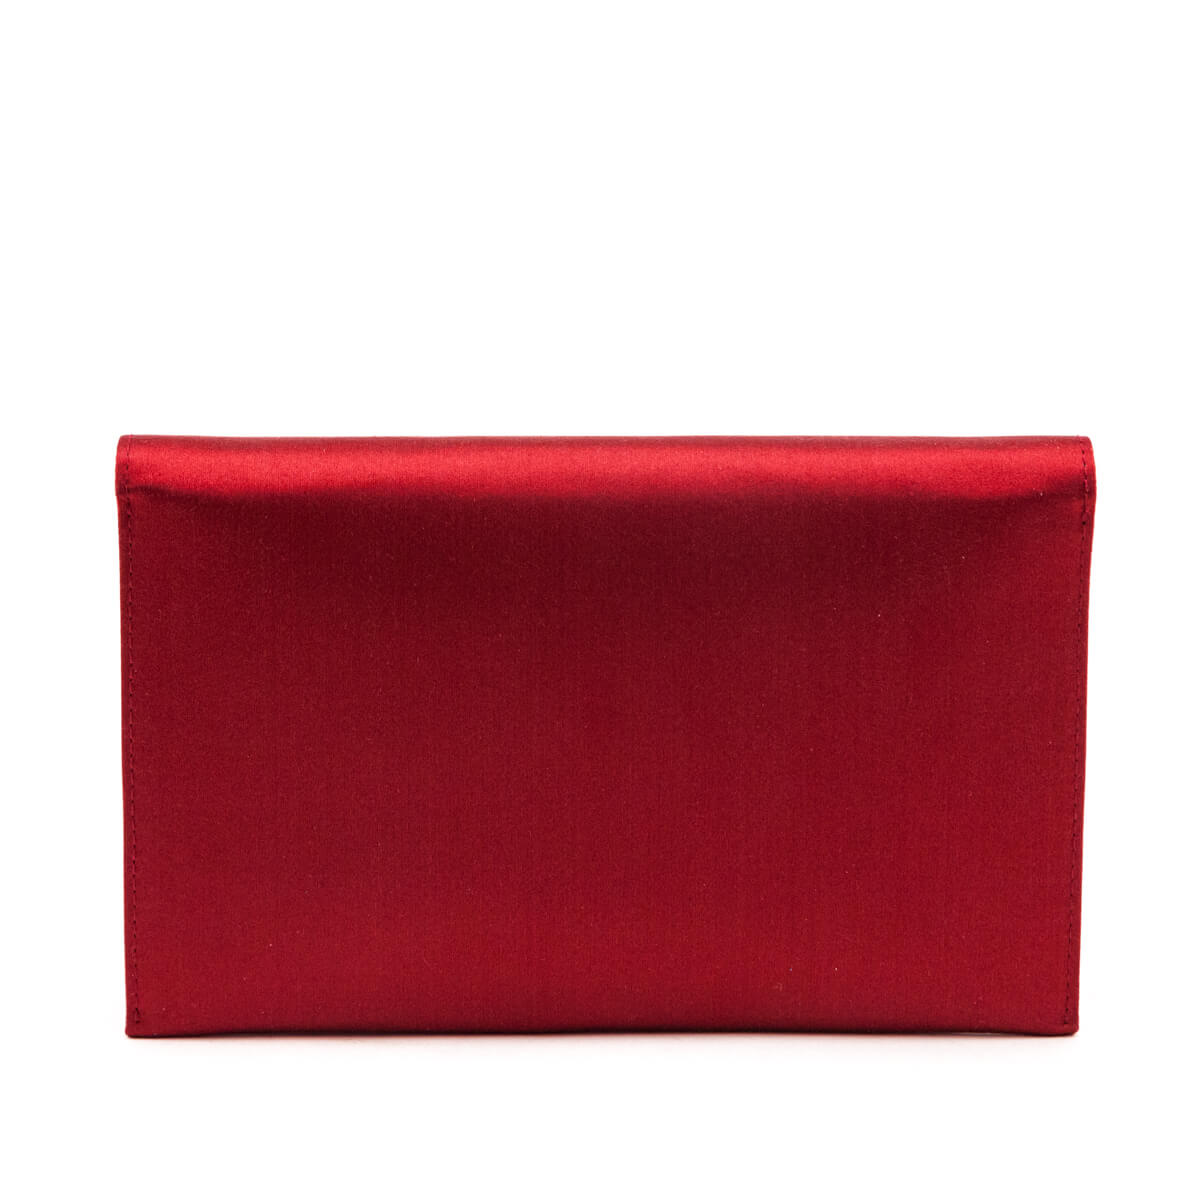 Judith Leiber Red Satin Bow Envelope Clutch - Love that Bag etc - Preowned Authentic Designer Handbags & Preloved Fashions